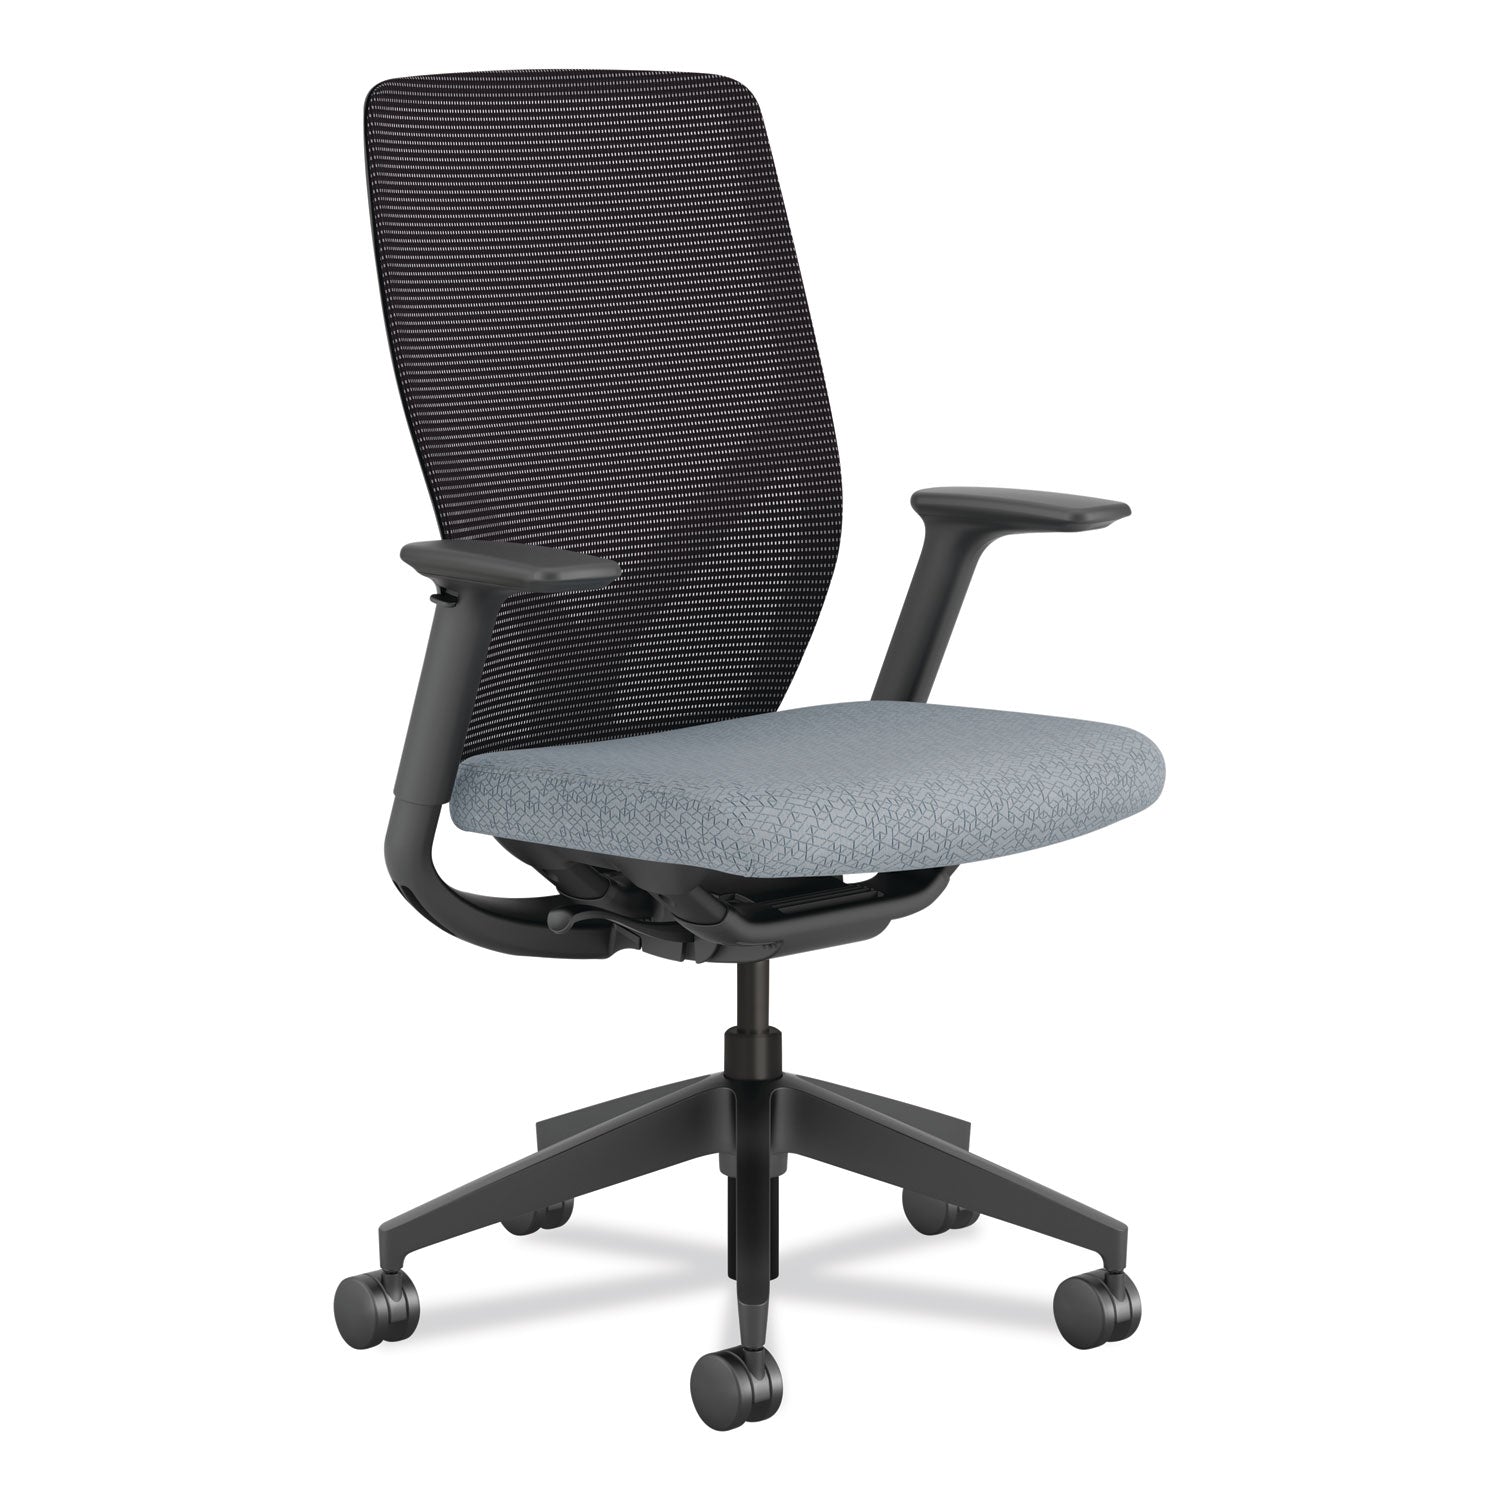 Flexion Mesh Back Task Chair, Supports Up to 300 lb, 14.81" to 19.7" Seat Height, Black/Basalt - 1